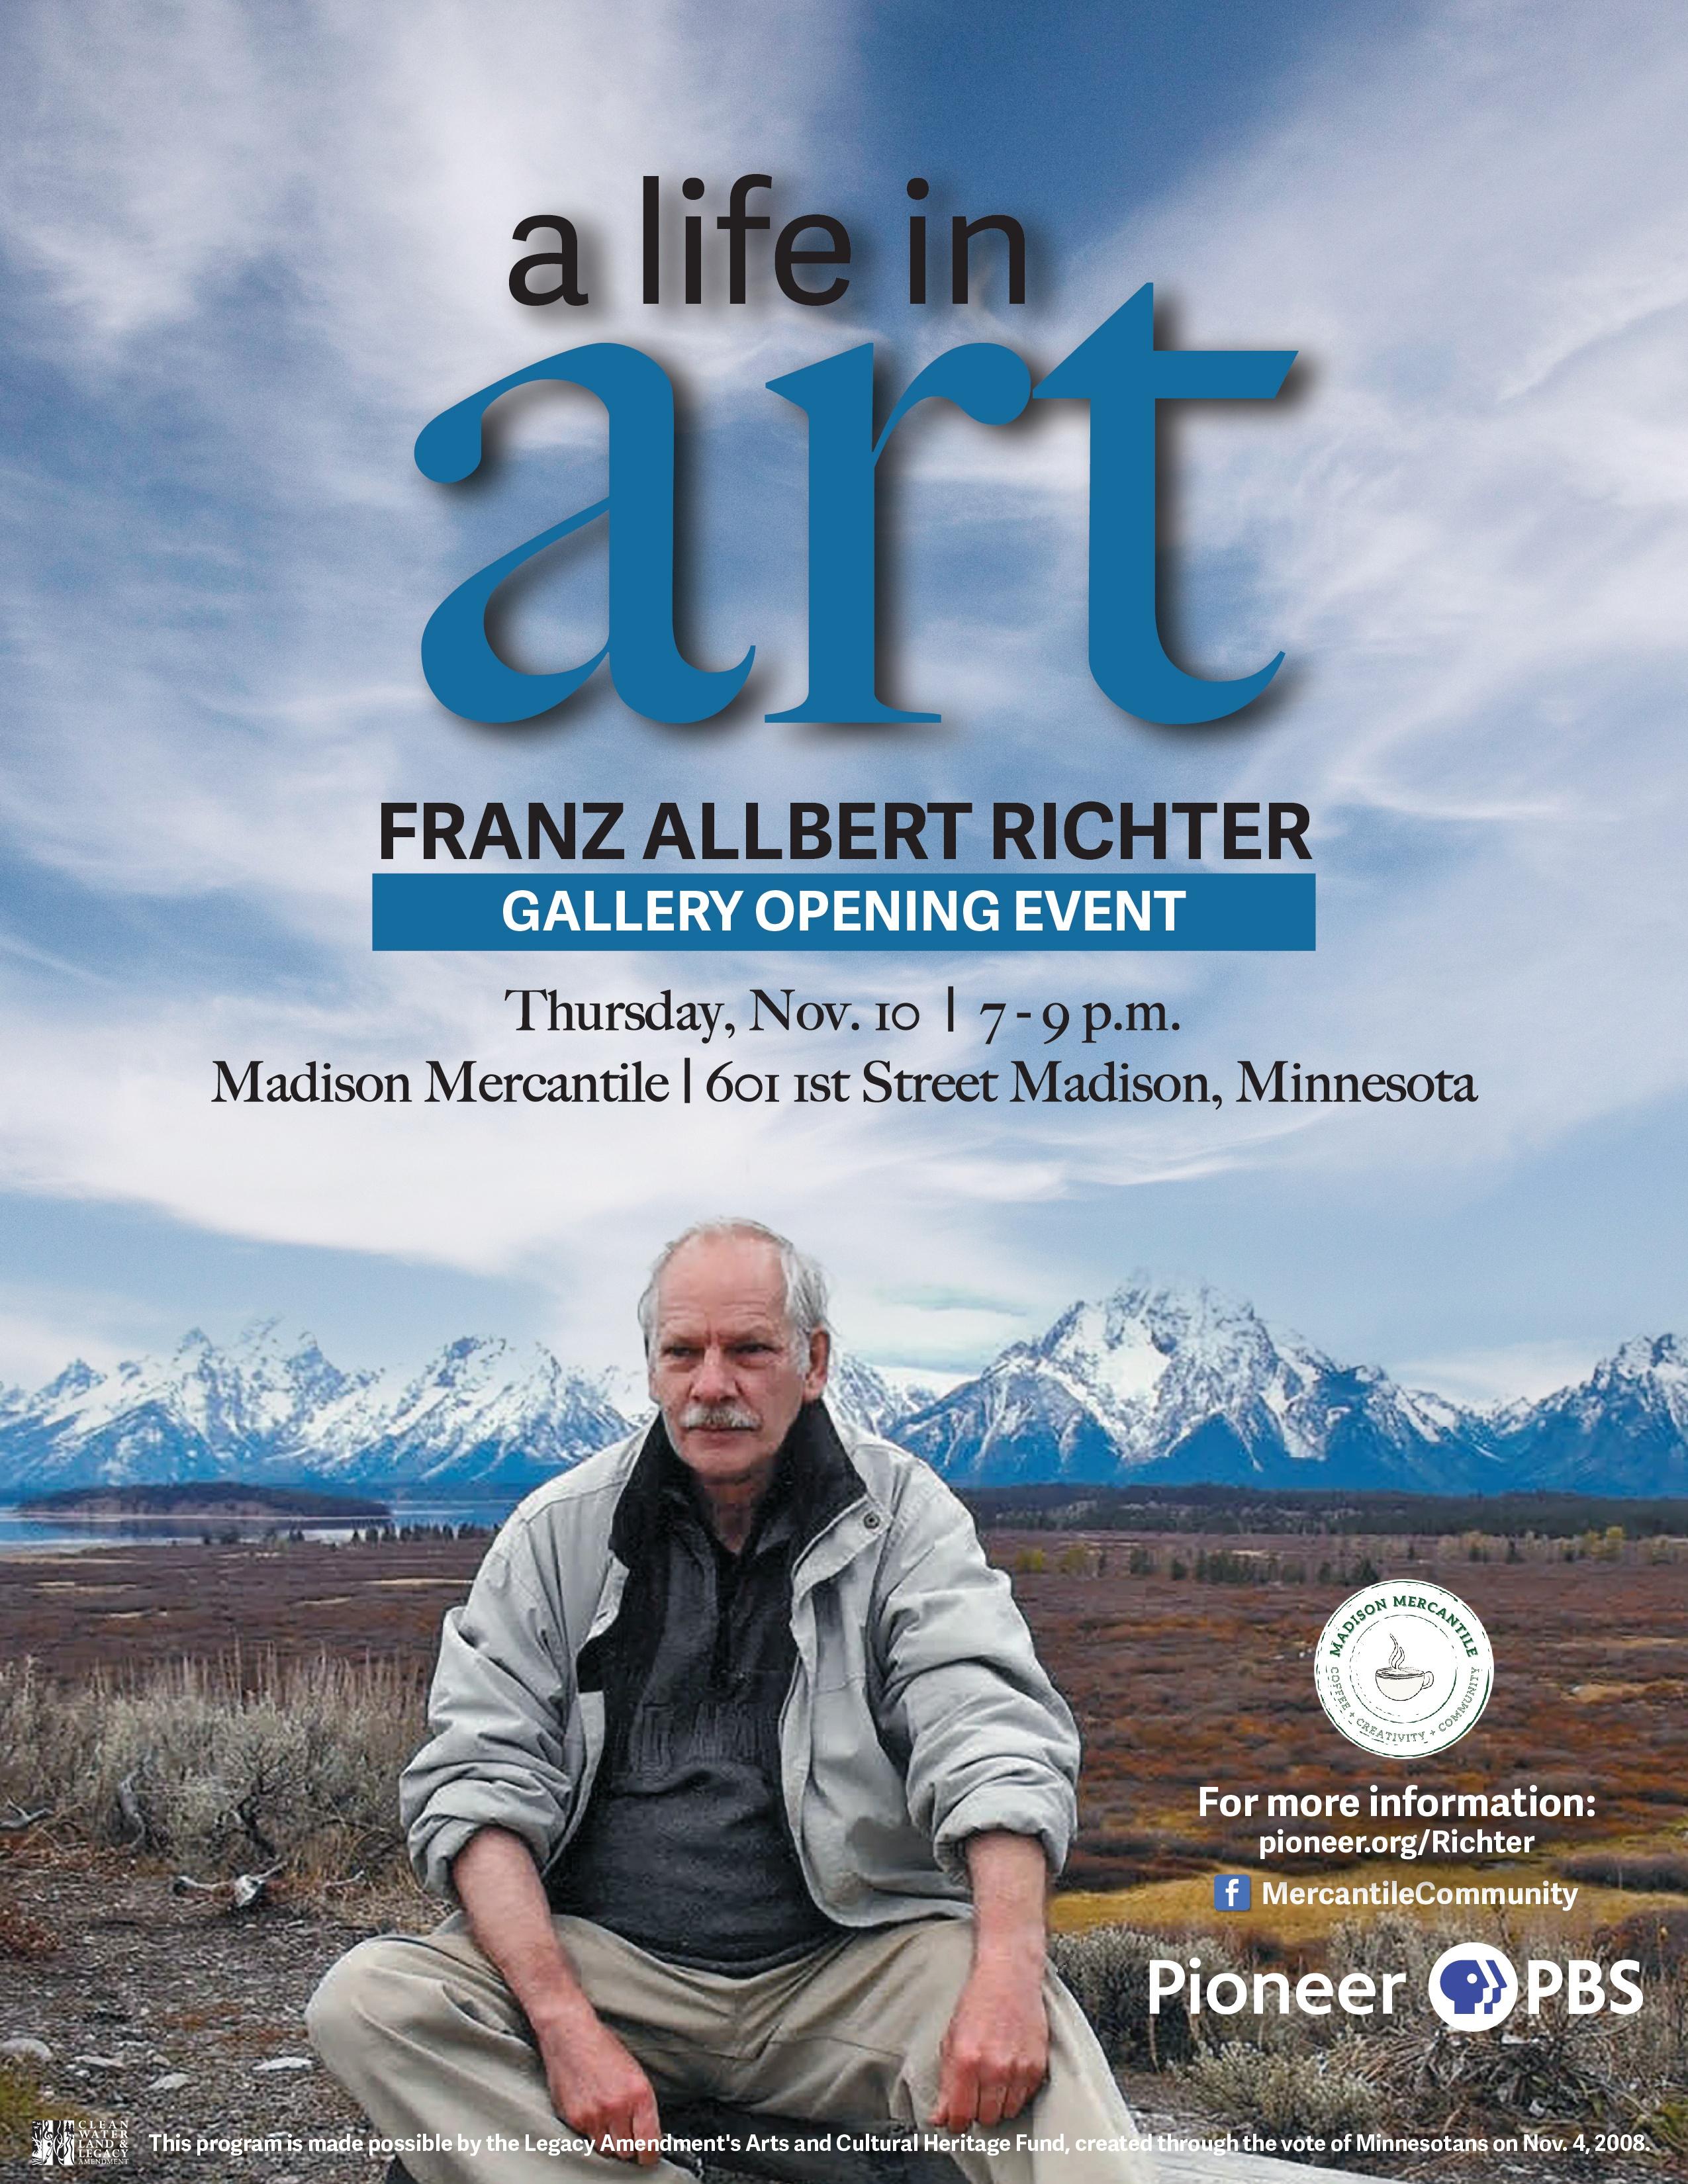 A gallery opening event featuring a lifetime of work by Clarkfield artist Franz Allbert Richter will be held on Thursday, November 10 from 7 to 9 p.m. at the Madison Mercantile at 601 First Street in Madison. 